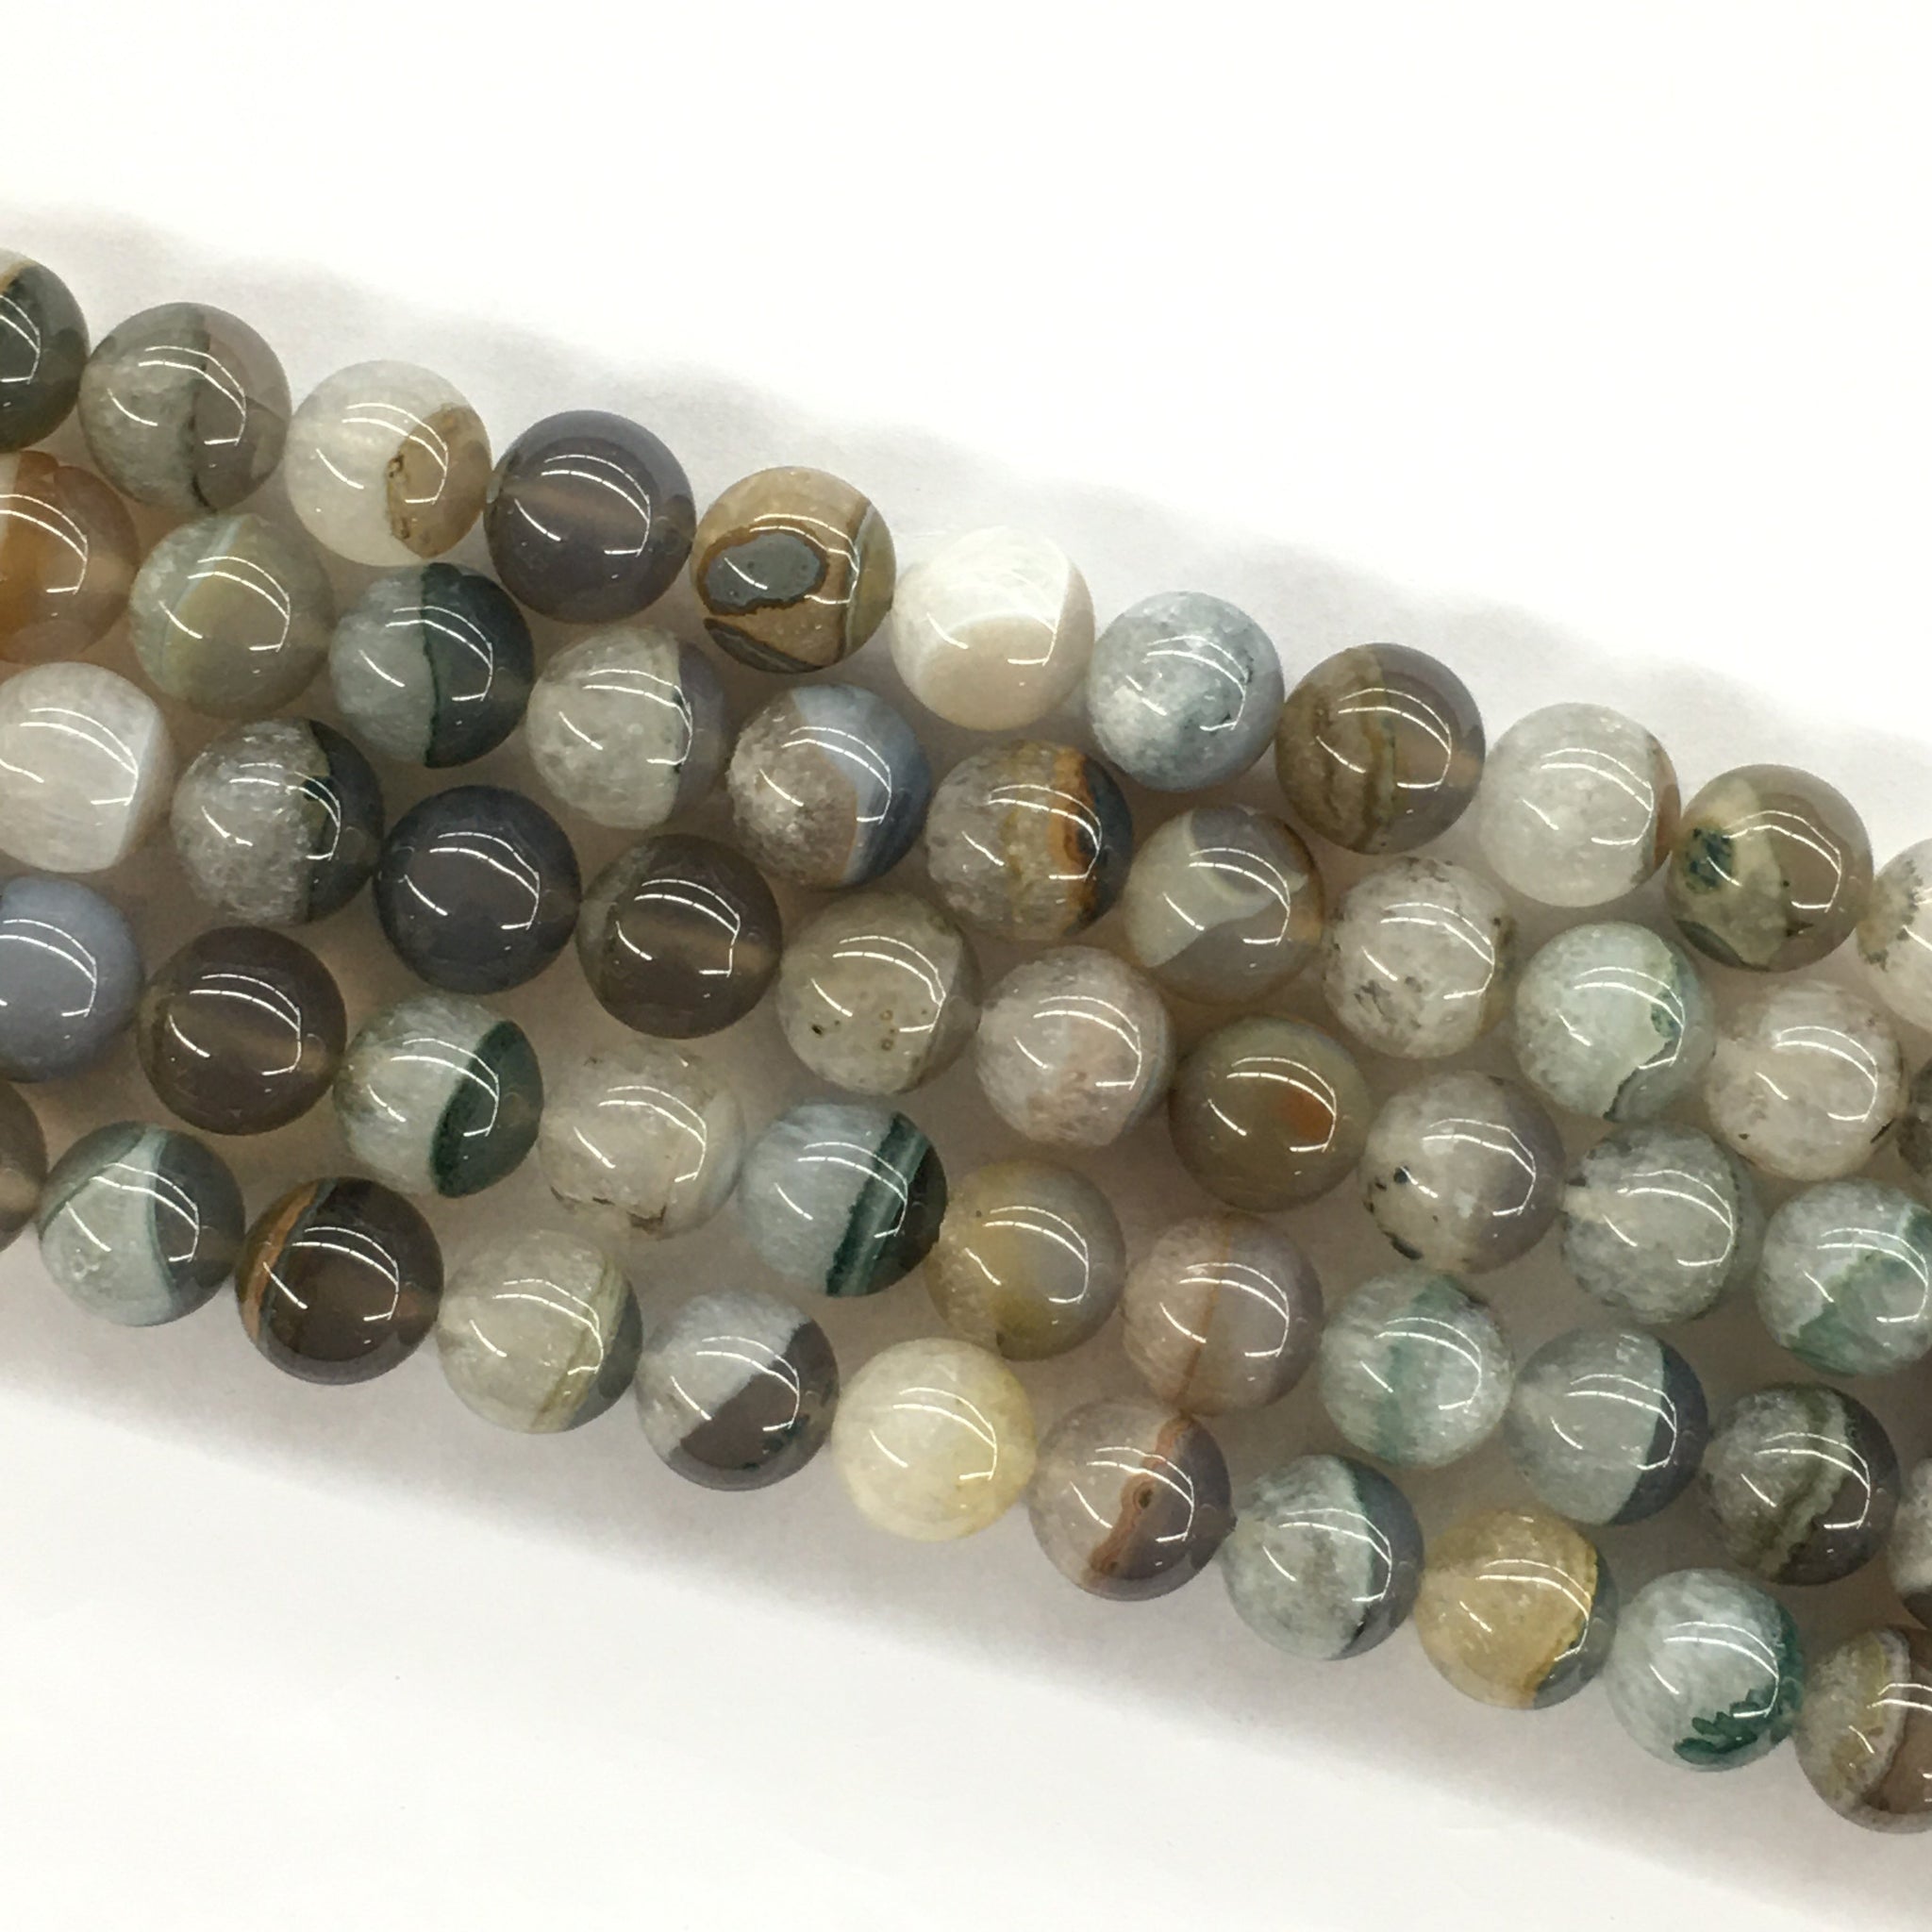 Cheap Natural Stone Beads Agates Jades Howlite Crystal Round Pony